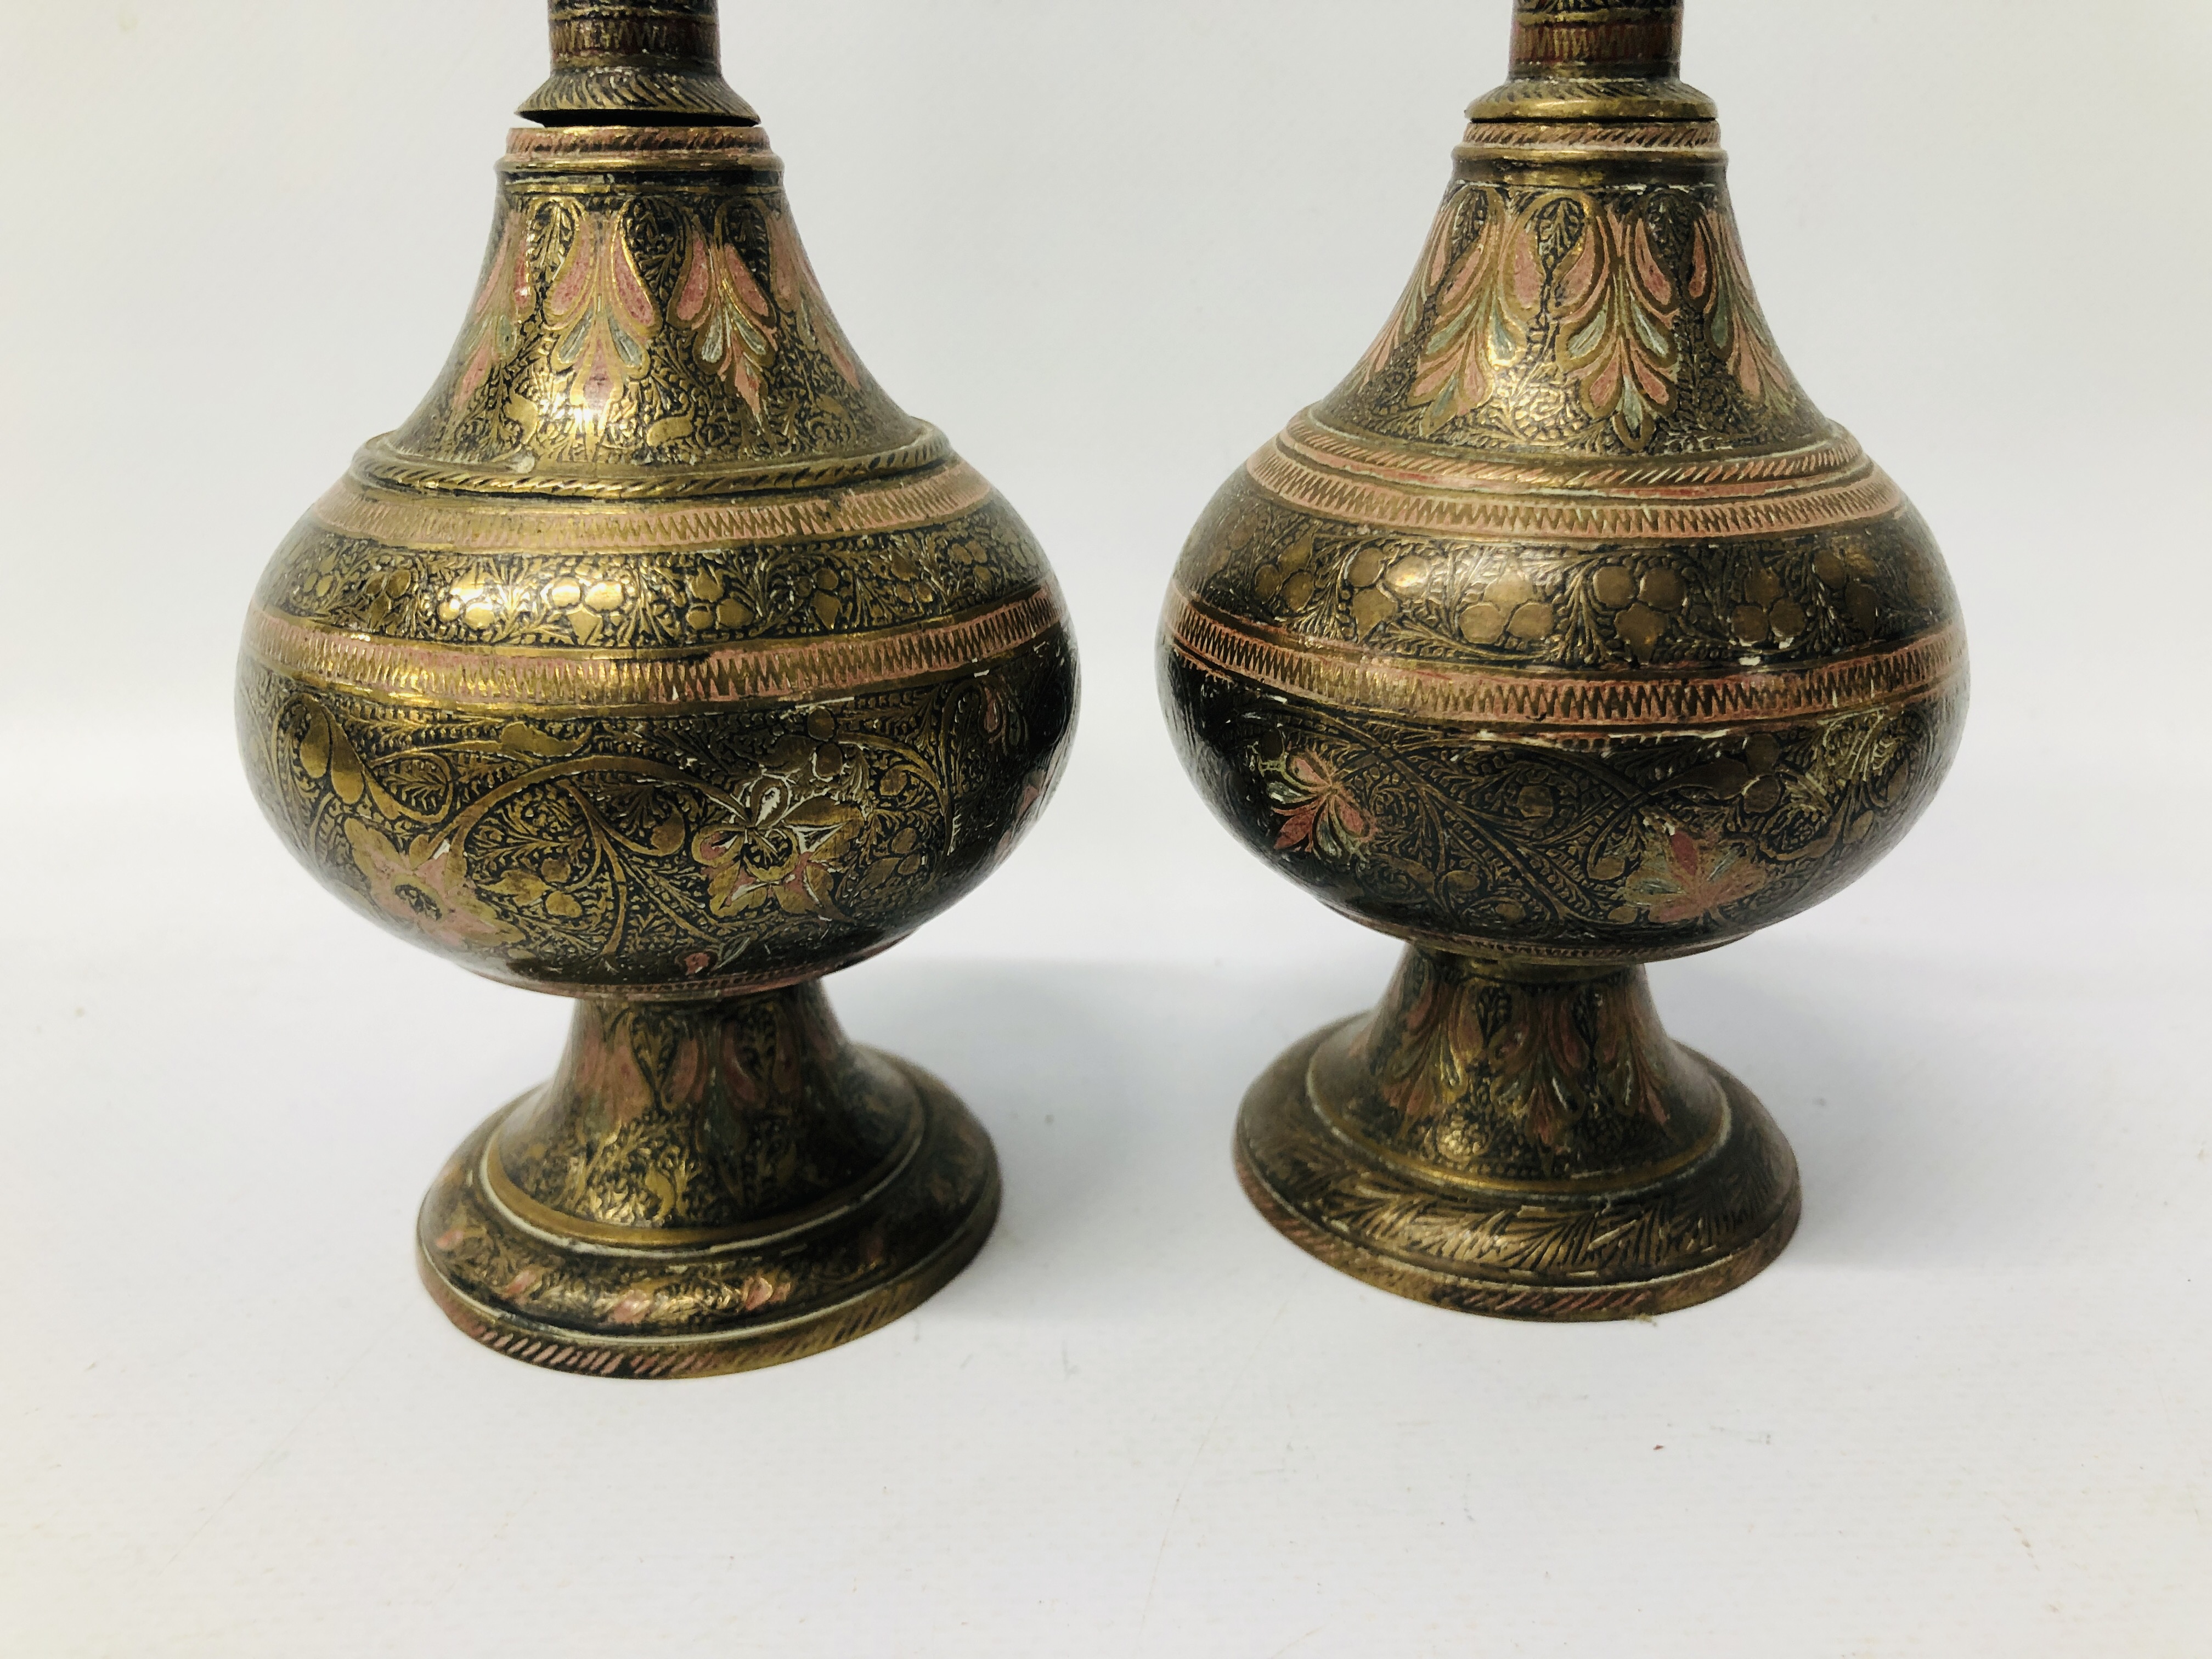 MIXED BRASS AND COPPER TO INCLUDE OIL LAMPS, LAMPS, STOVE, TRIVET, WATERING CAN, SCALES, CUPS, - Image 27 of 27